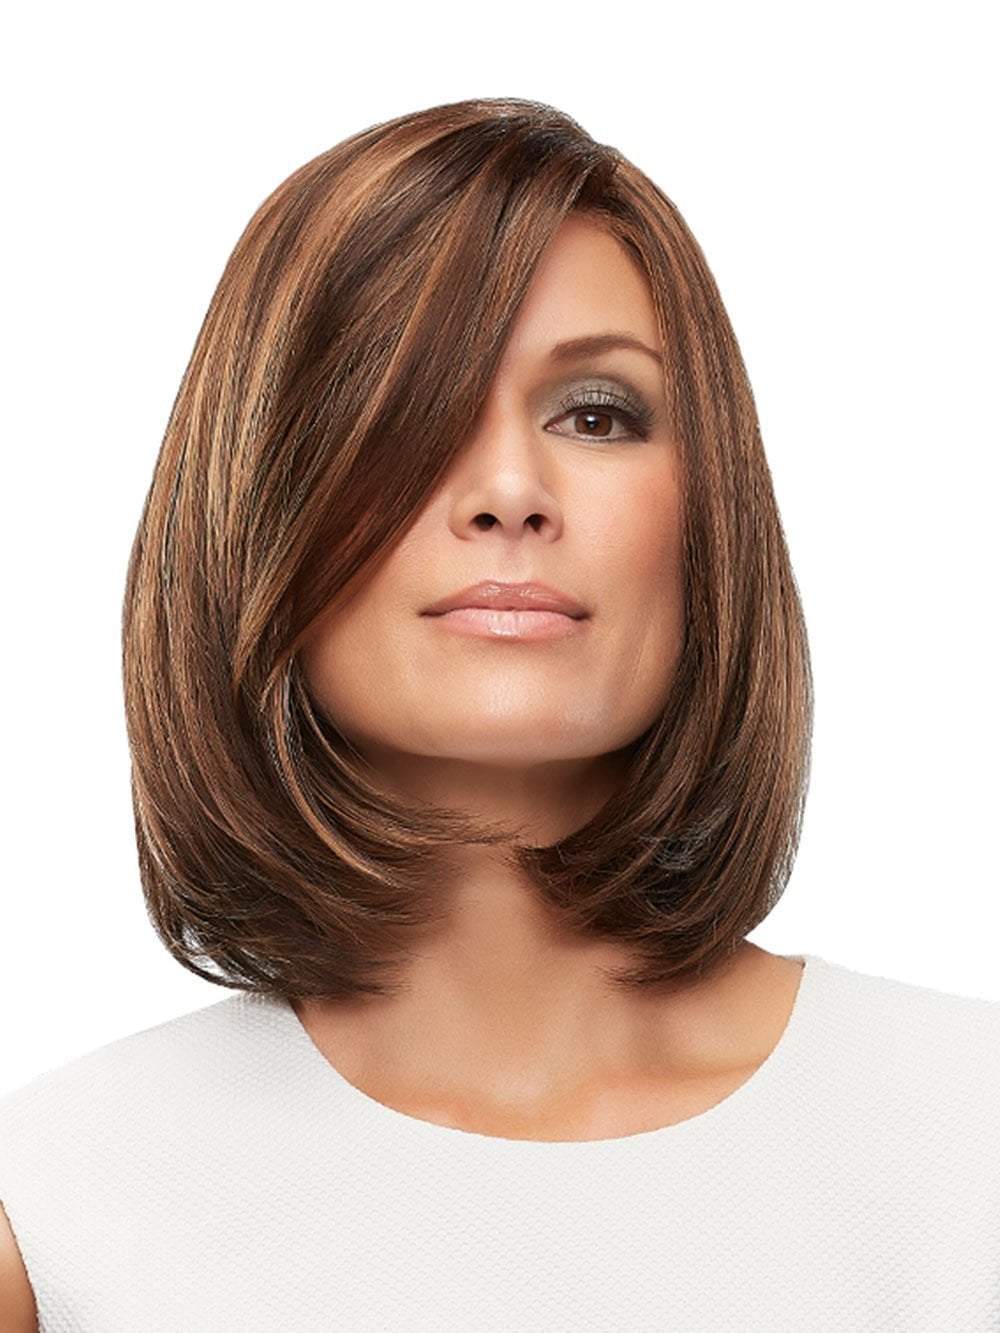 The Cameron Petite Wig by Jon Renau is a lengthy bob with layered ends that create shape and movement